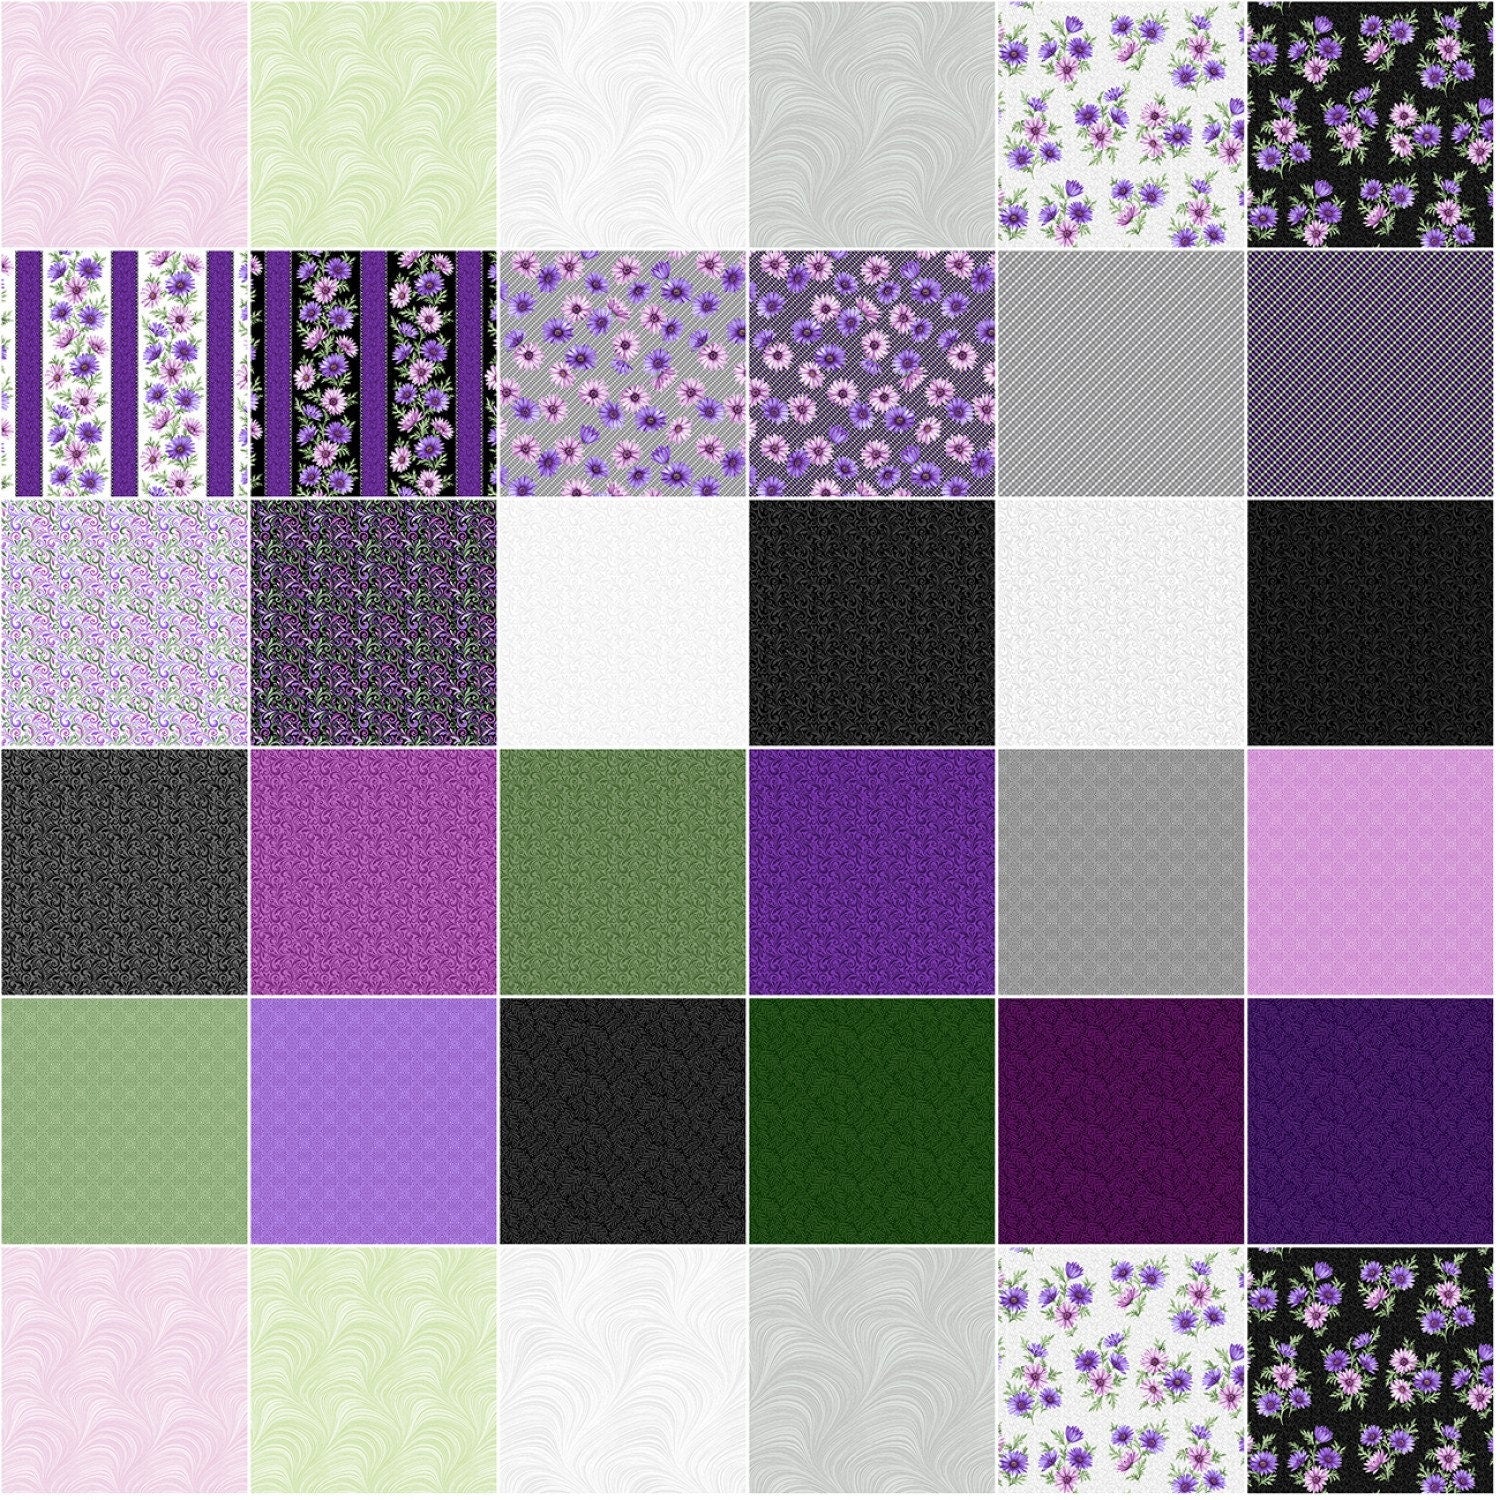 40 5 Quilting Fabric Squares LUSHIOUS PURPLE & GREENS GRAPES/BUY IT NOW!!!